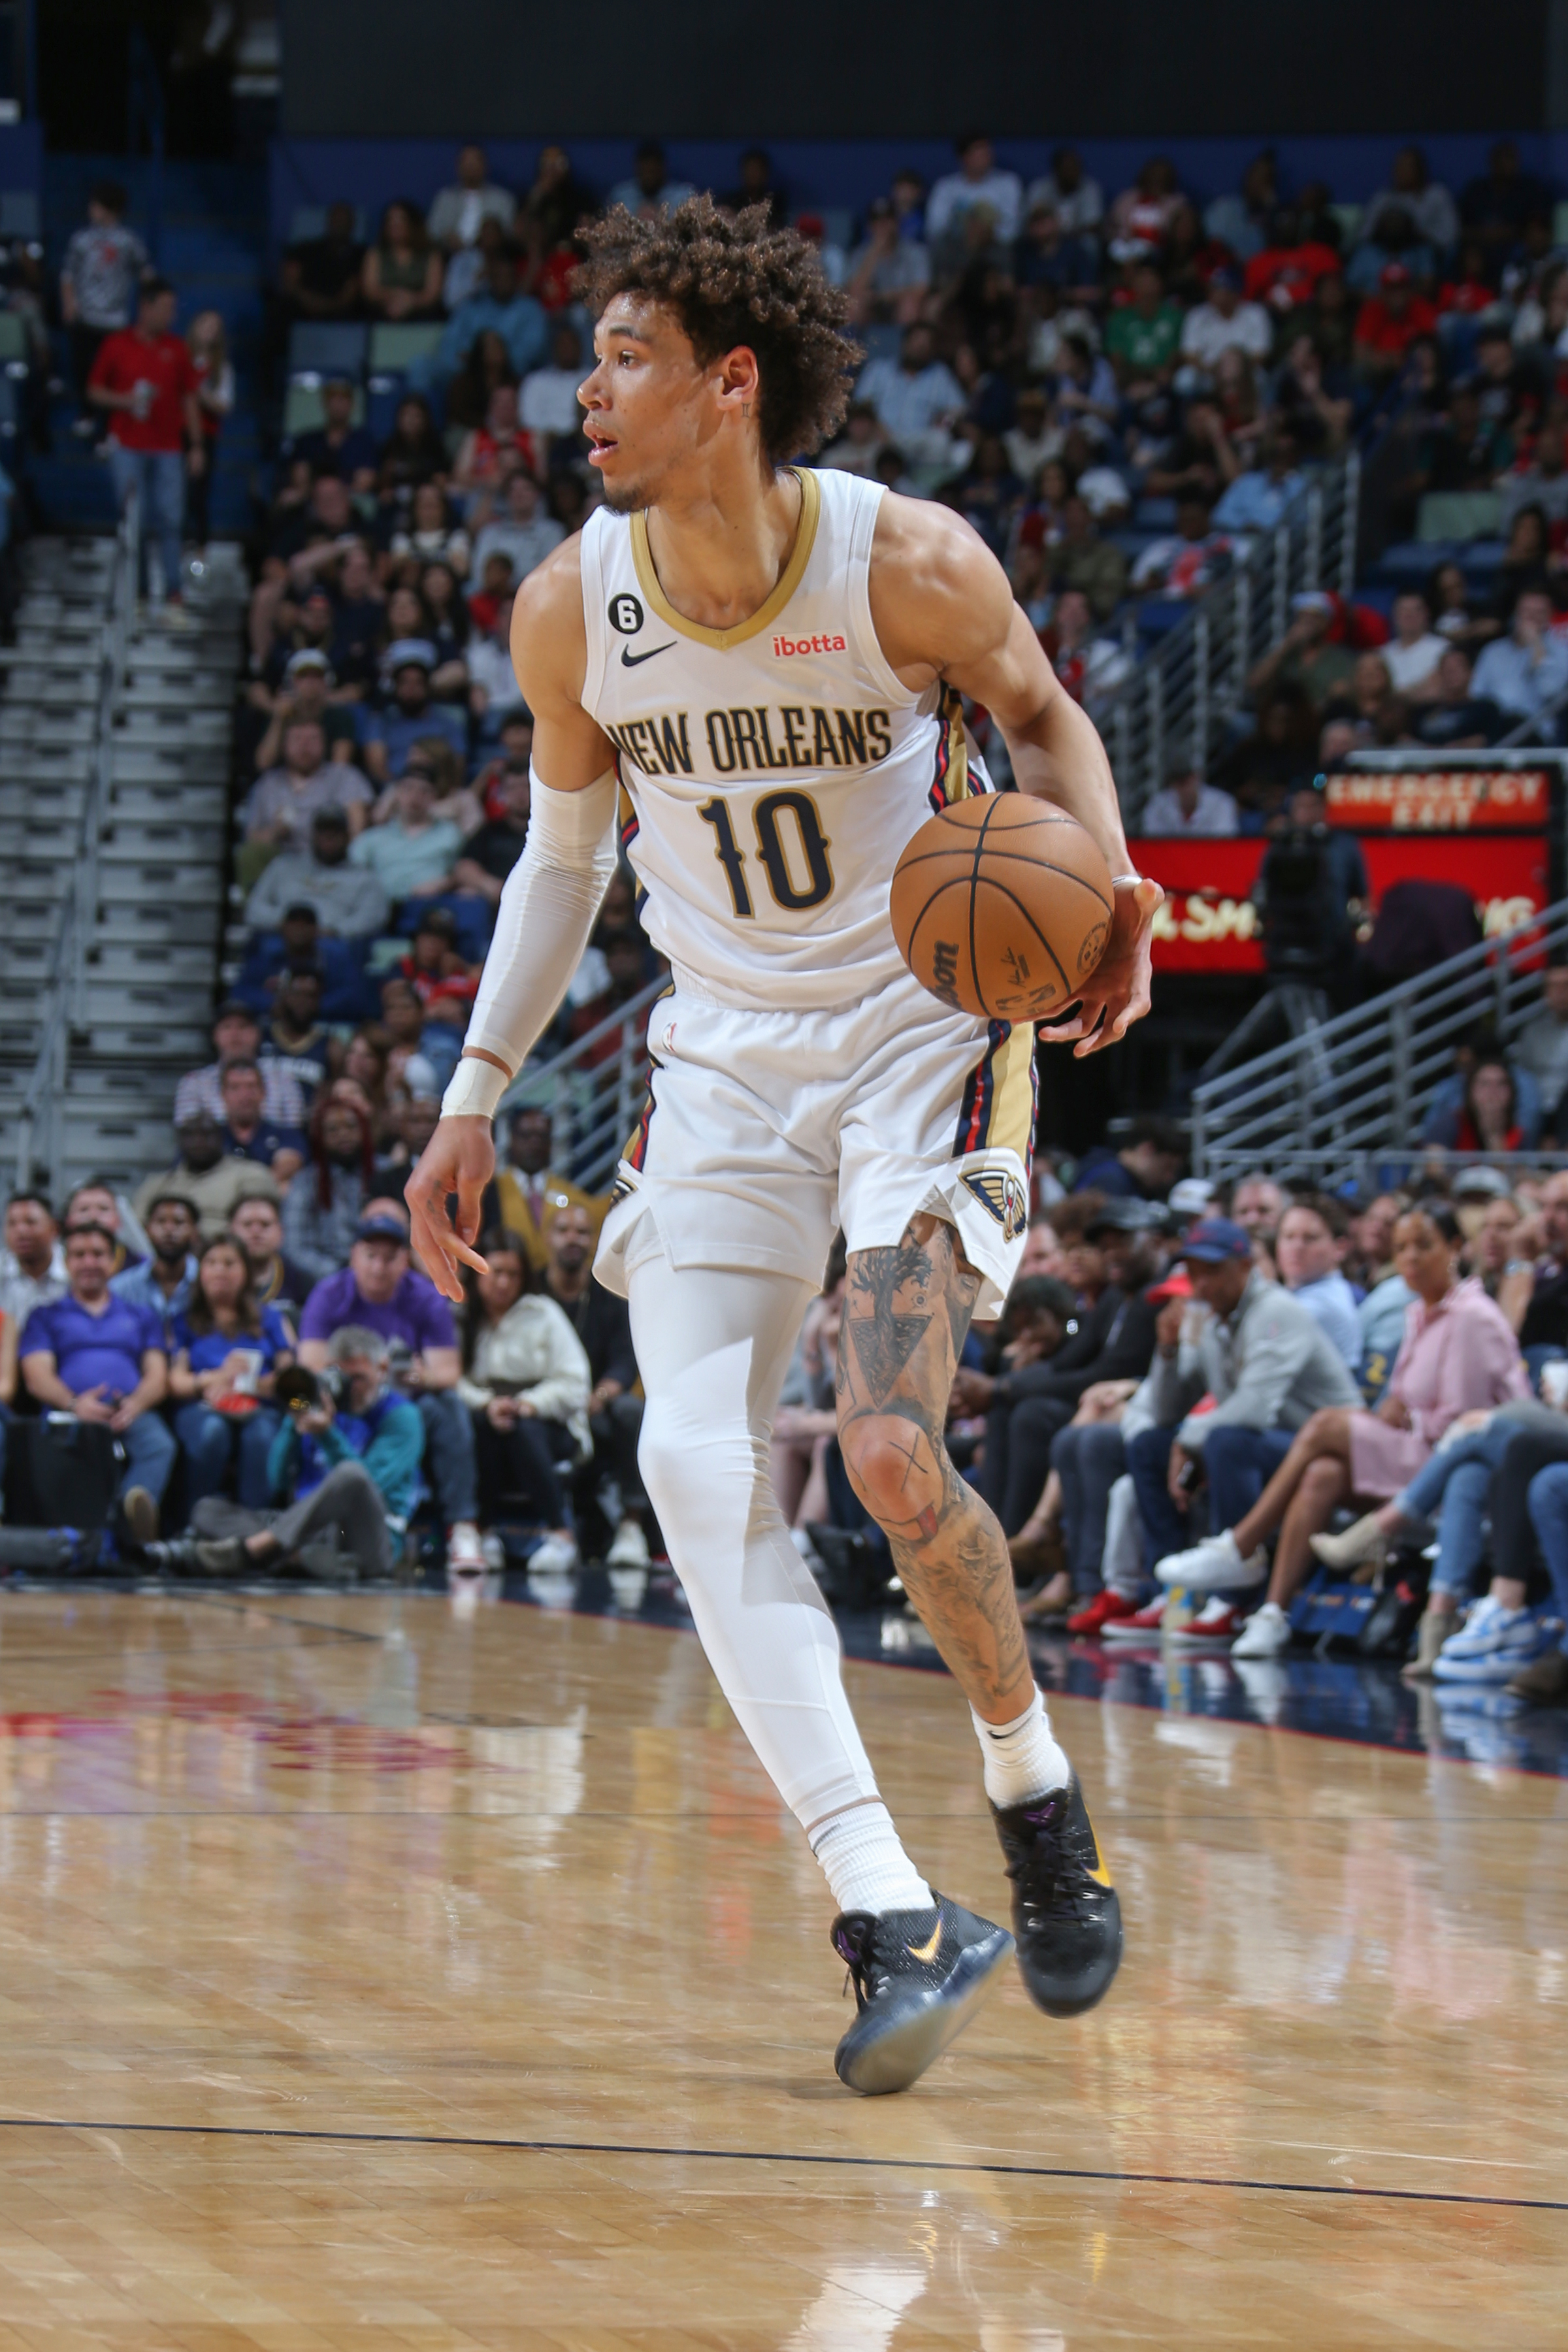 Jaxson Hayes #10 of the New Orleans Pelicans goes to the basket during the game on March 11, 2023 at Smoothie King Center in New Orleans, Louisiana. NOTE TO USER: User expressly acknowledges and agrees that, by downloading and or using this Photograph, user is consenting to the terms and conditions of the Getty Images License Agreement. Mandatory Copyright Notice: Copyright 2023 NBAE